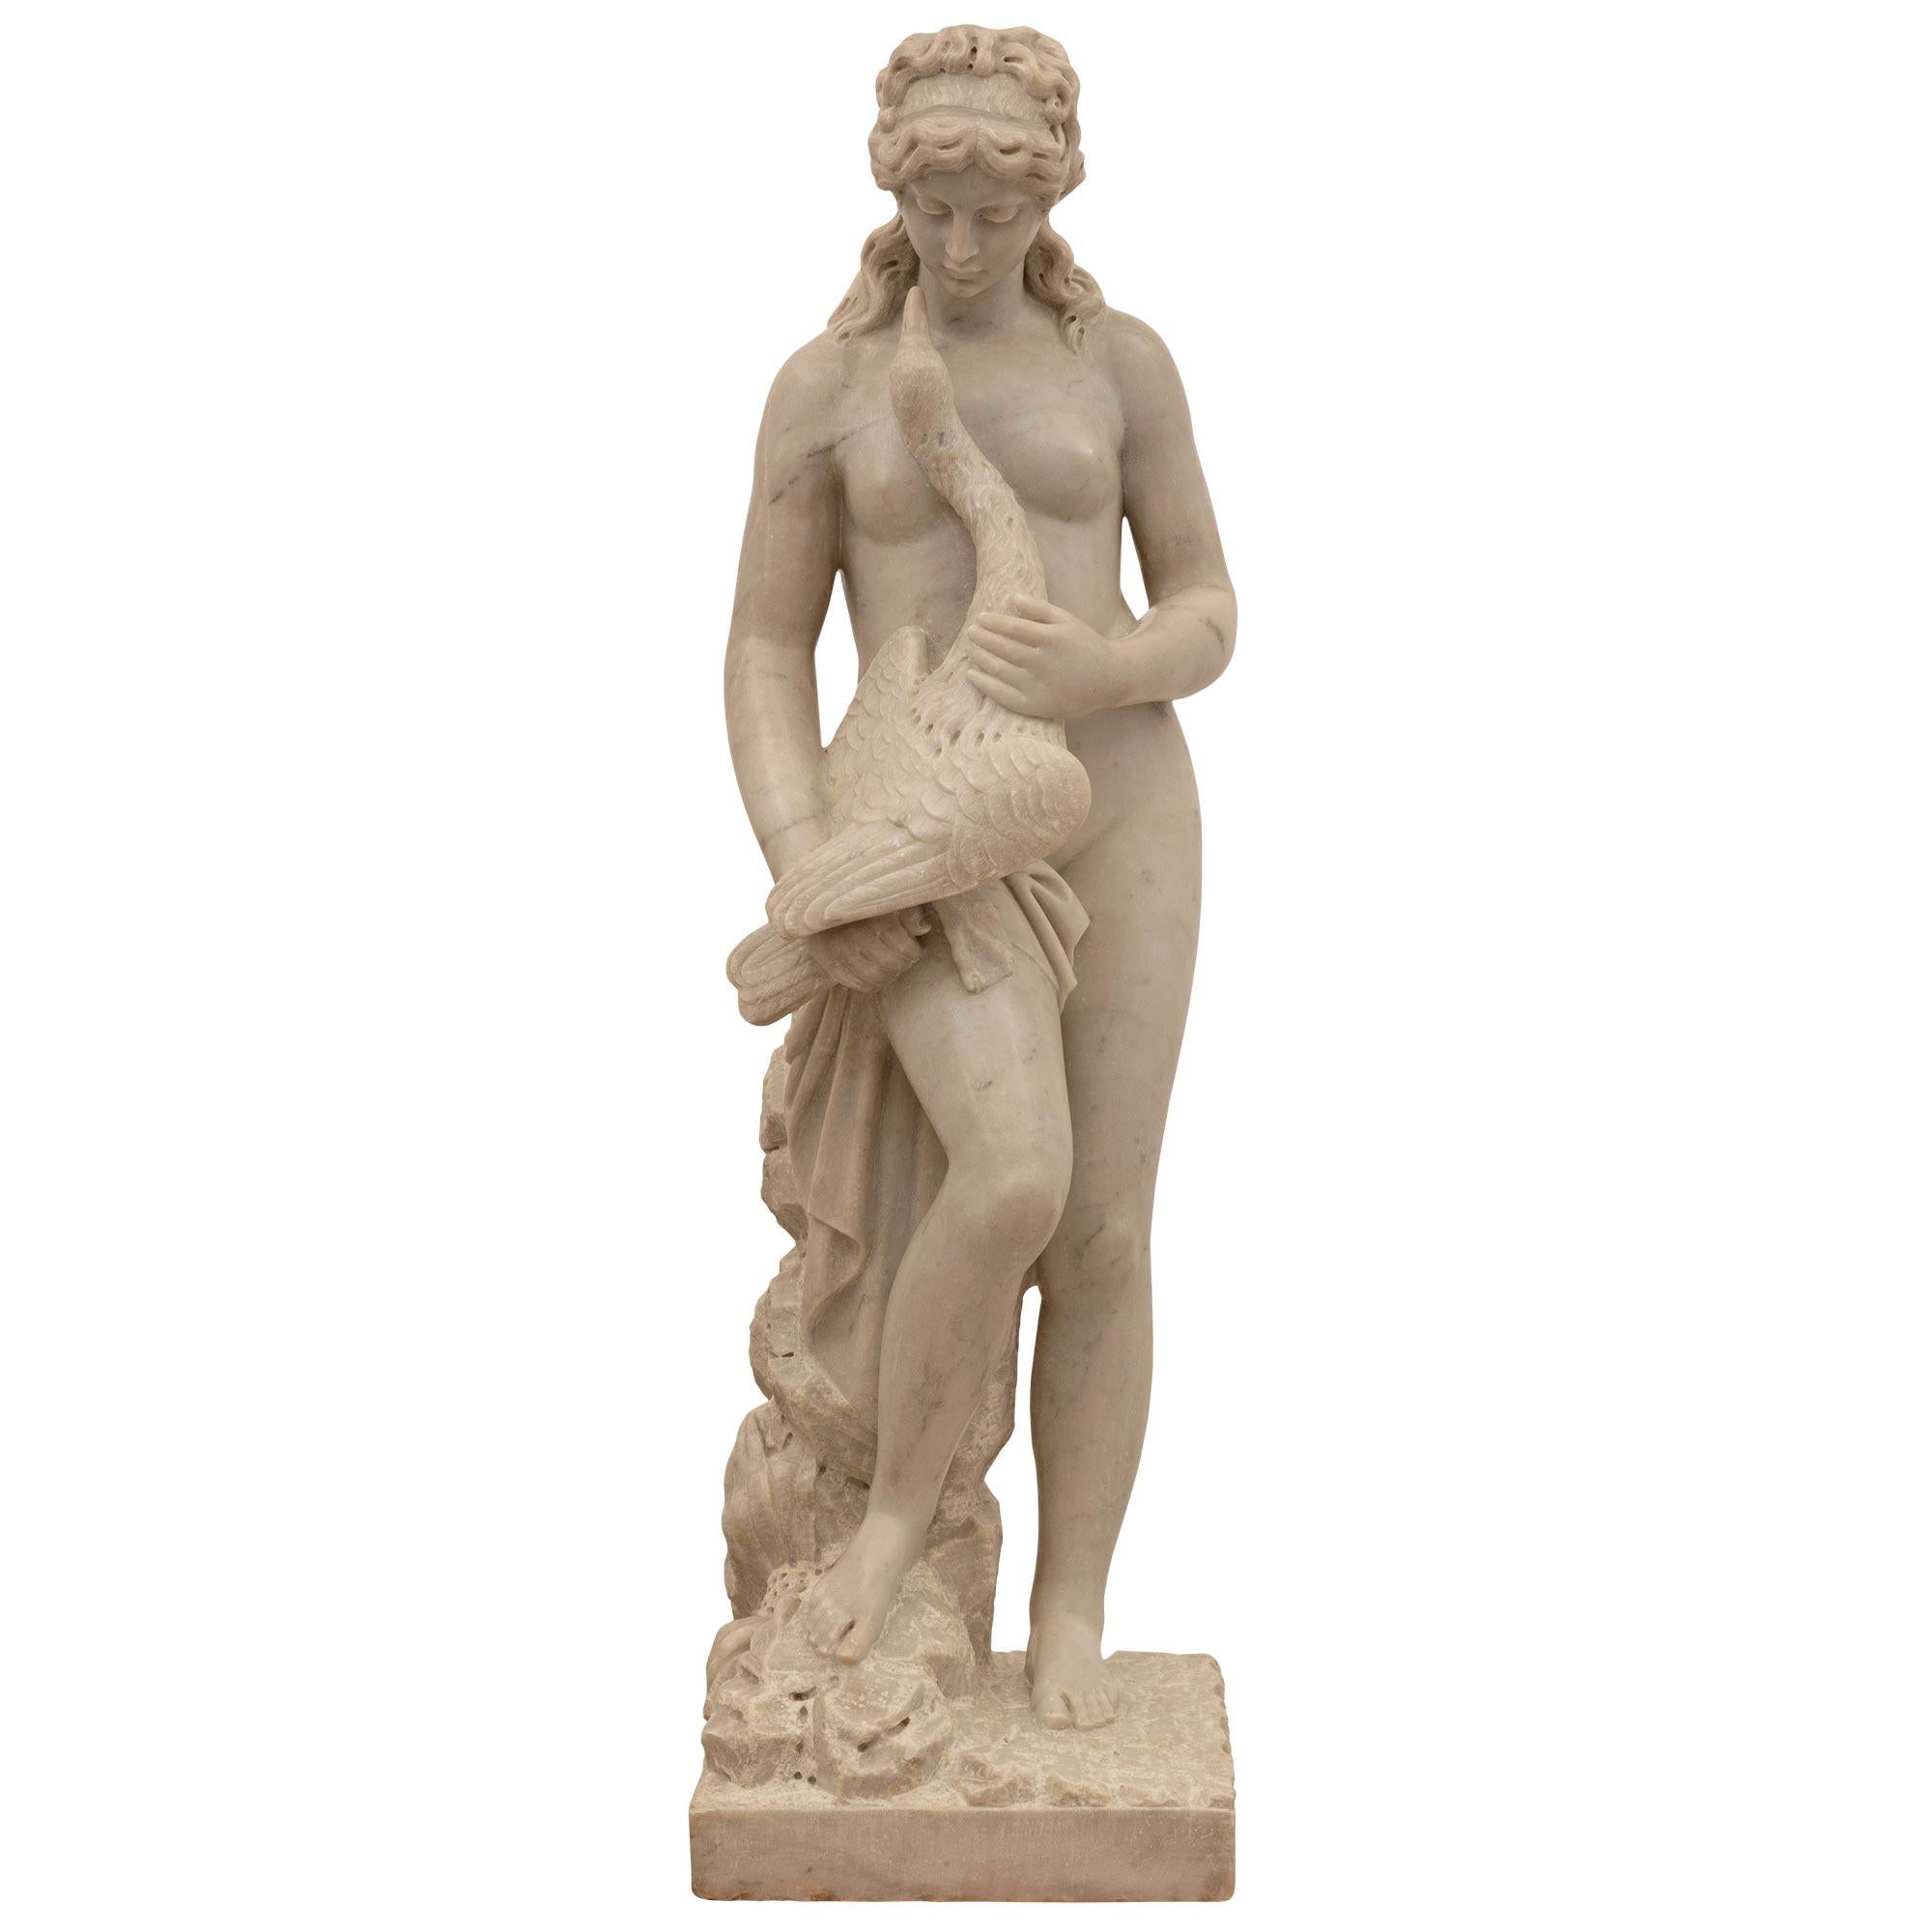 A beautiful and extremely high quality Italian 19th century white Carrara marble statue of Leda and the swan. The statue is raised by a square base with a superb ground like design with a most decorative rock formation leading up the back with